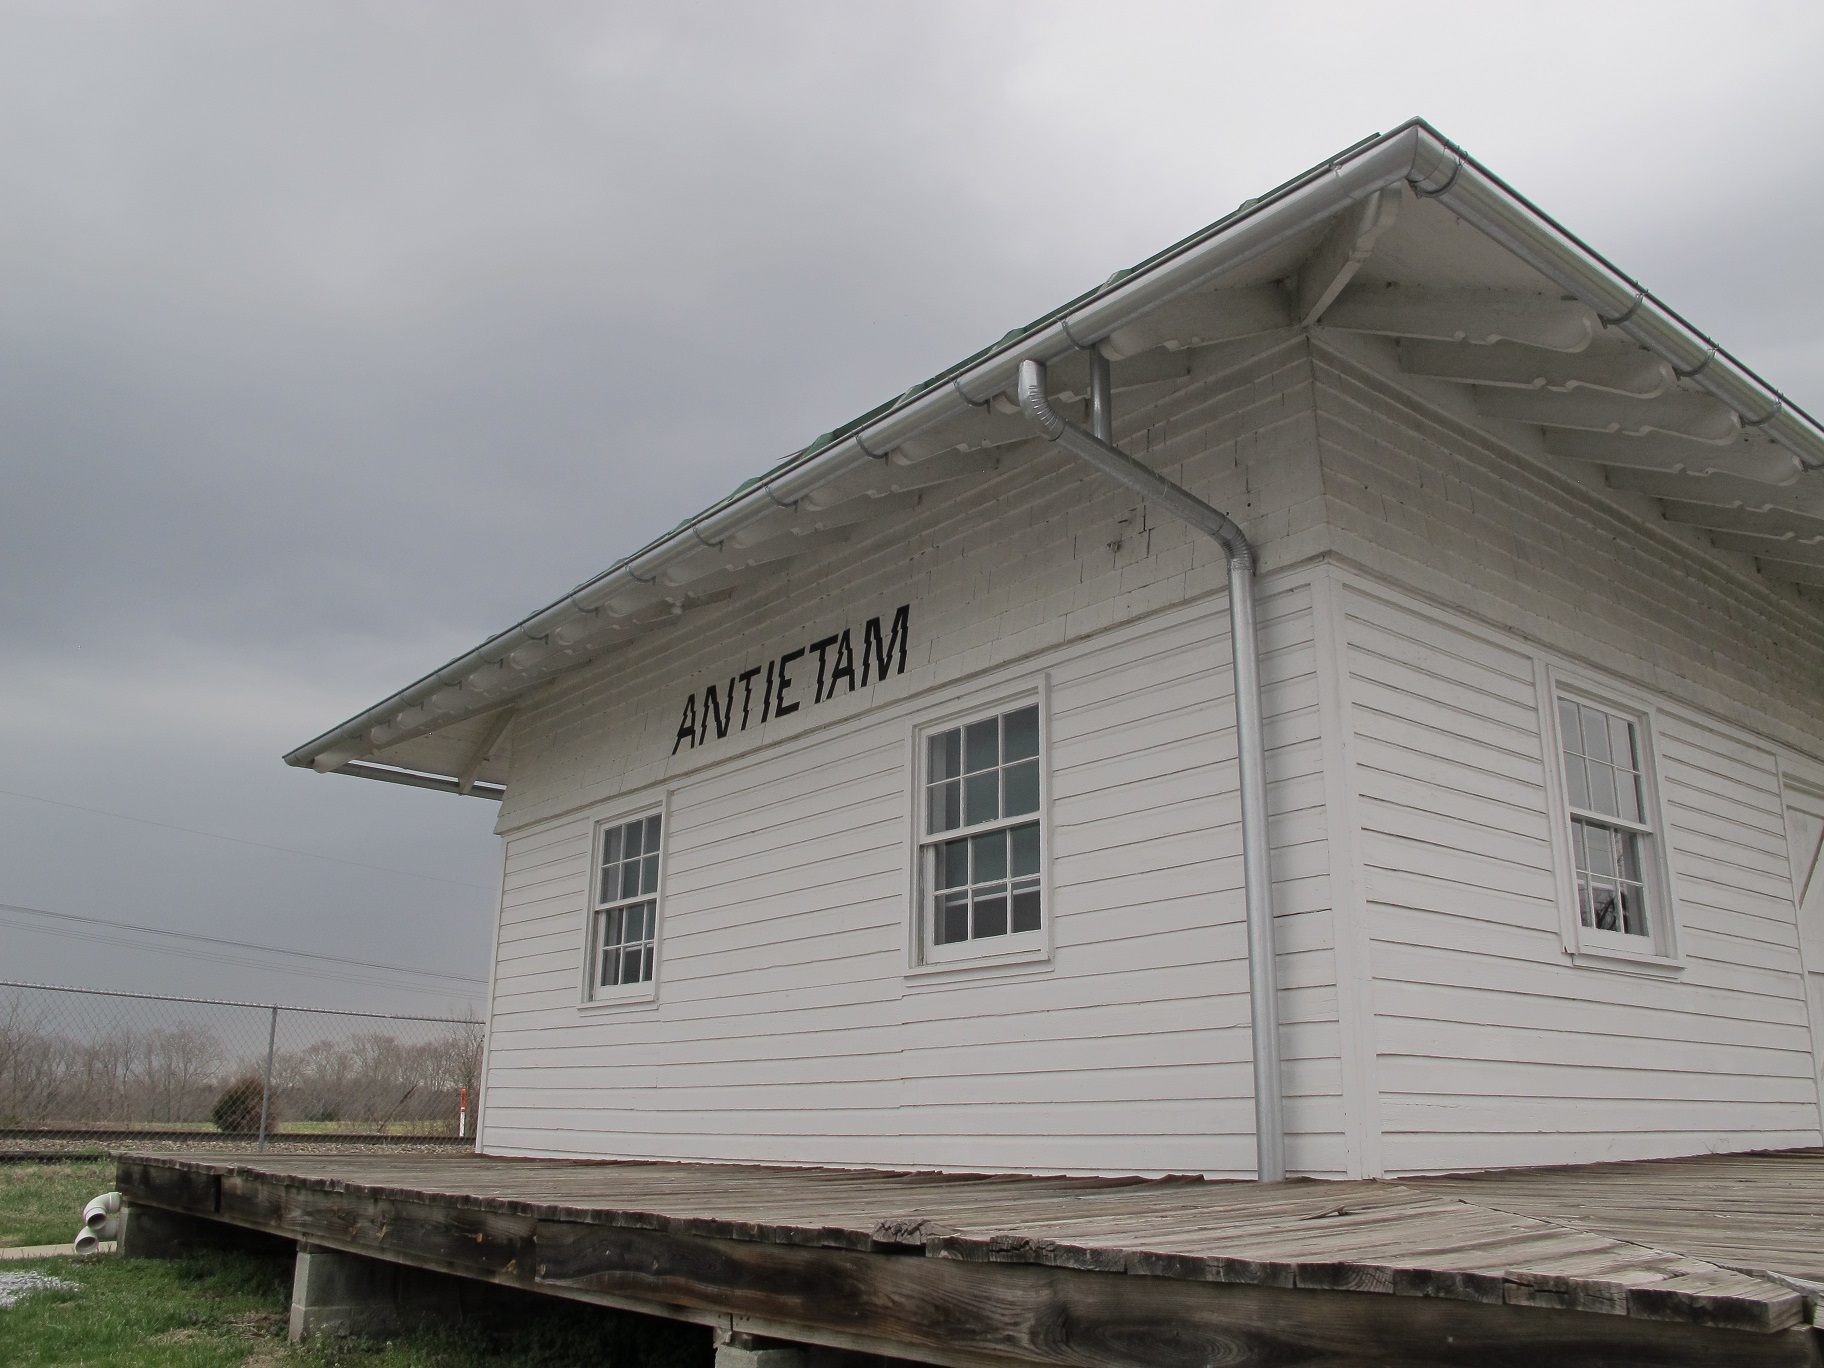 Antietam Station, a white building made out of wood with the letters "ANTIETAM" painted in black ink.